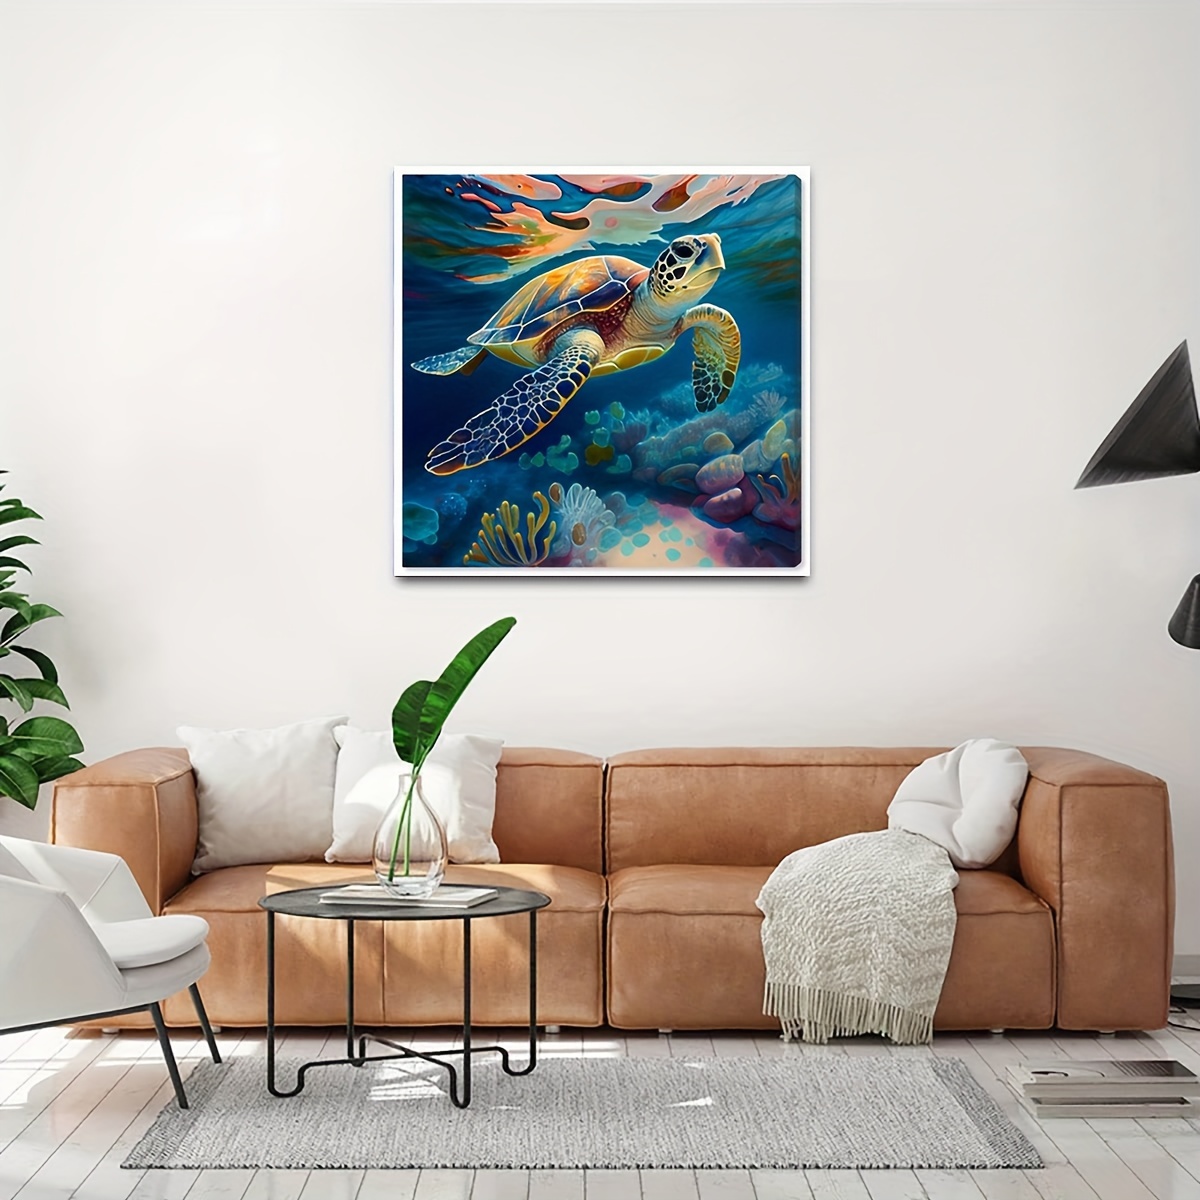 5D Diamond Painting Colorful Abstract Sea Turtle Kit